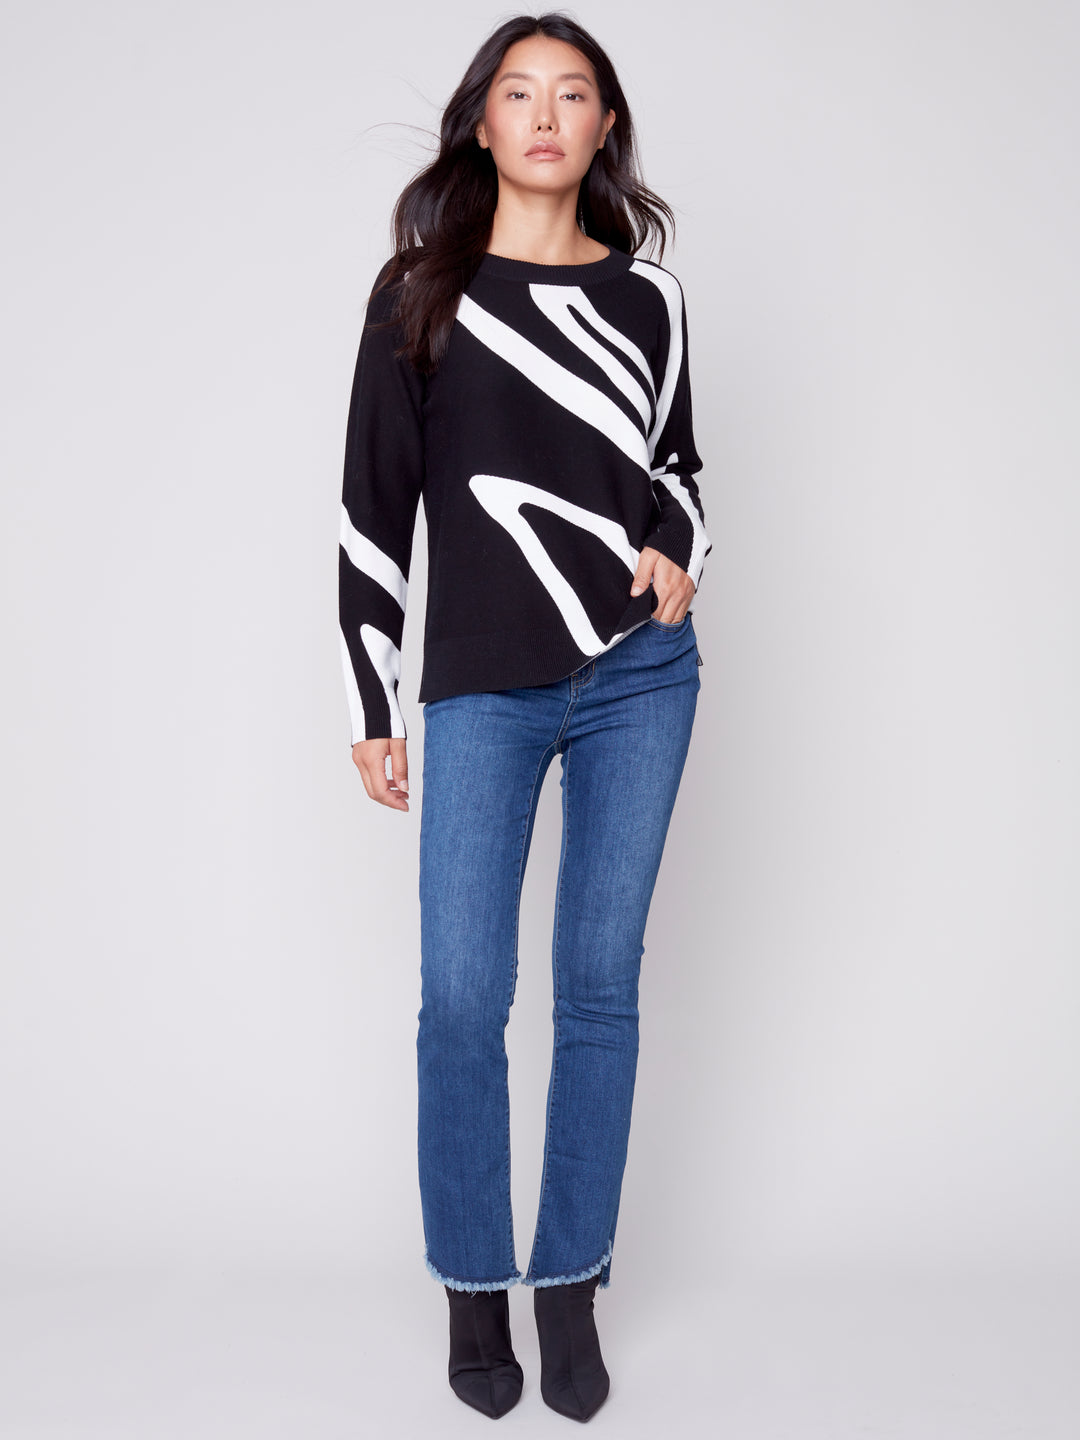 Cotton Knit Long Sleeve Top